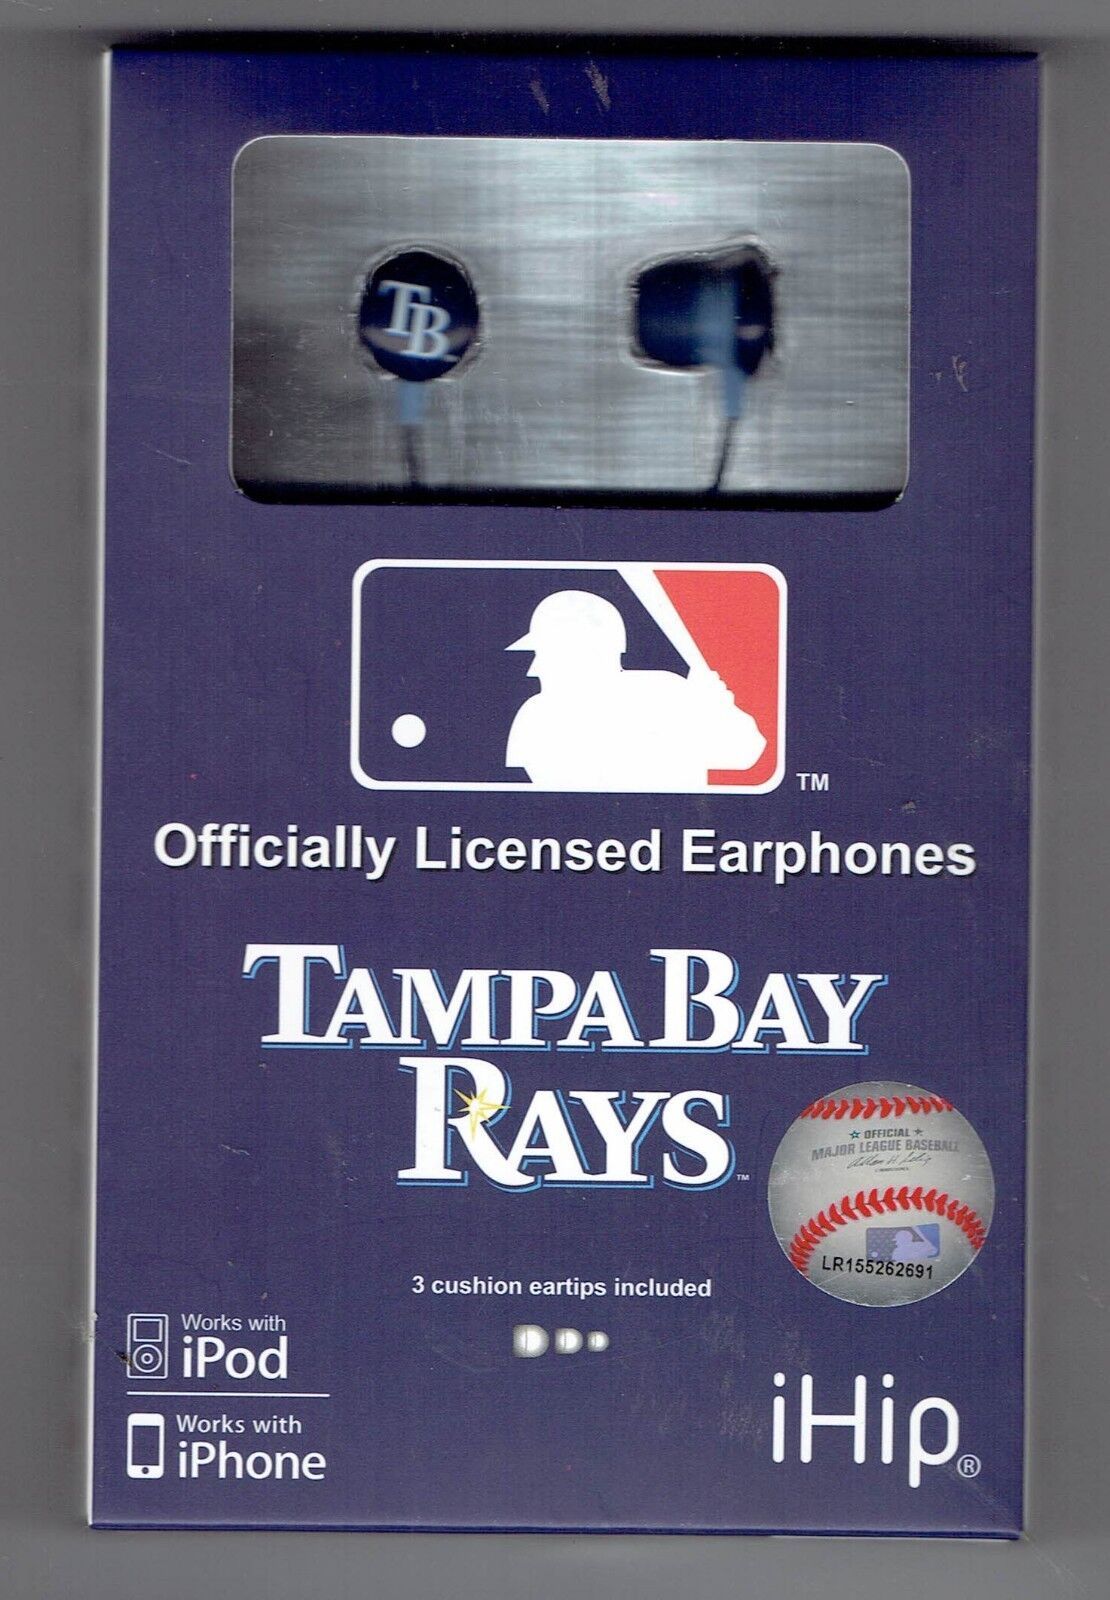 iHIP Officially Licensed MLB TEAM LOGO Earphones Tampa Bay Rays - $9.65